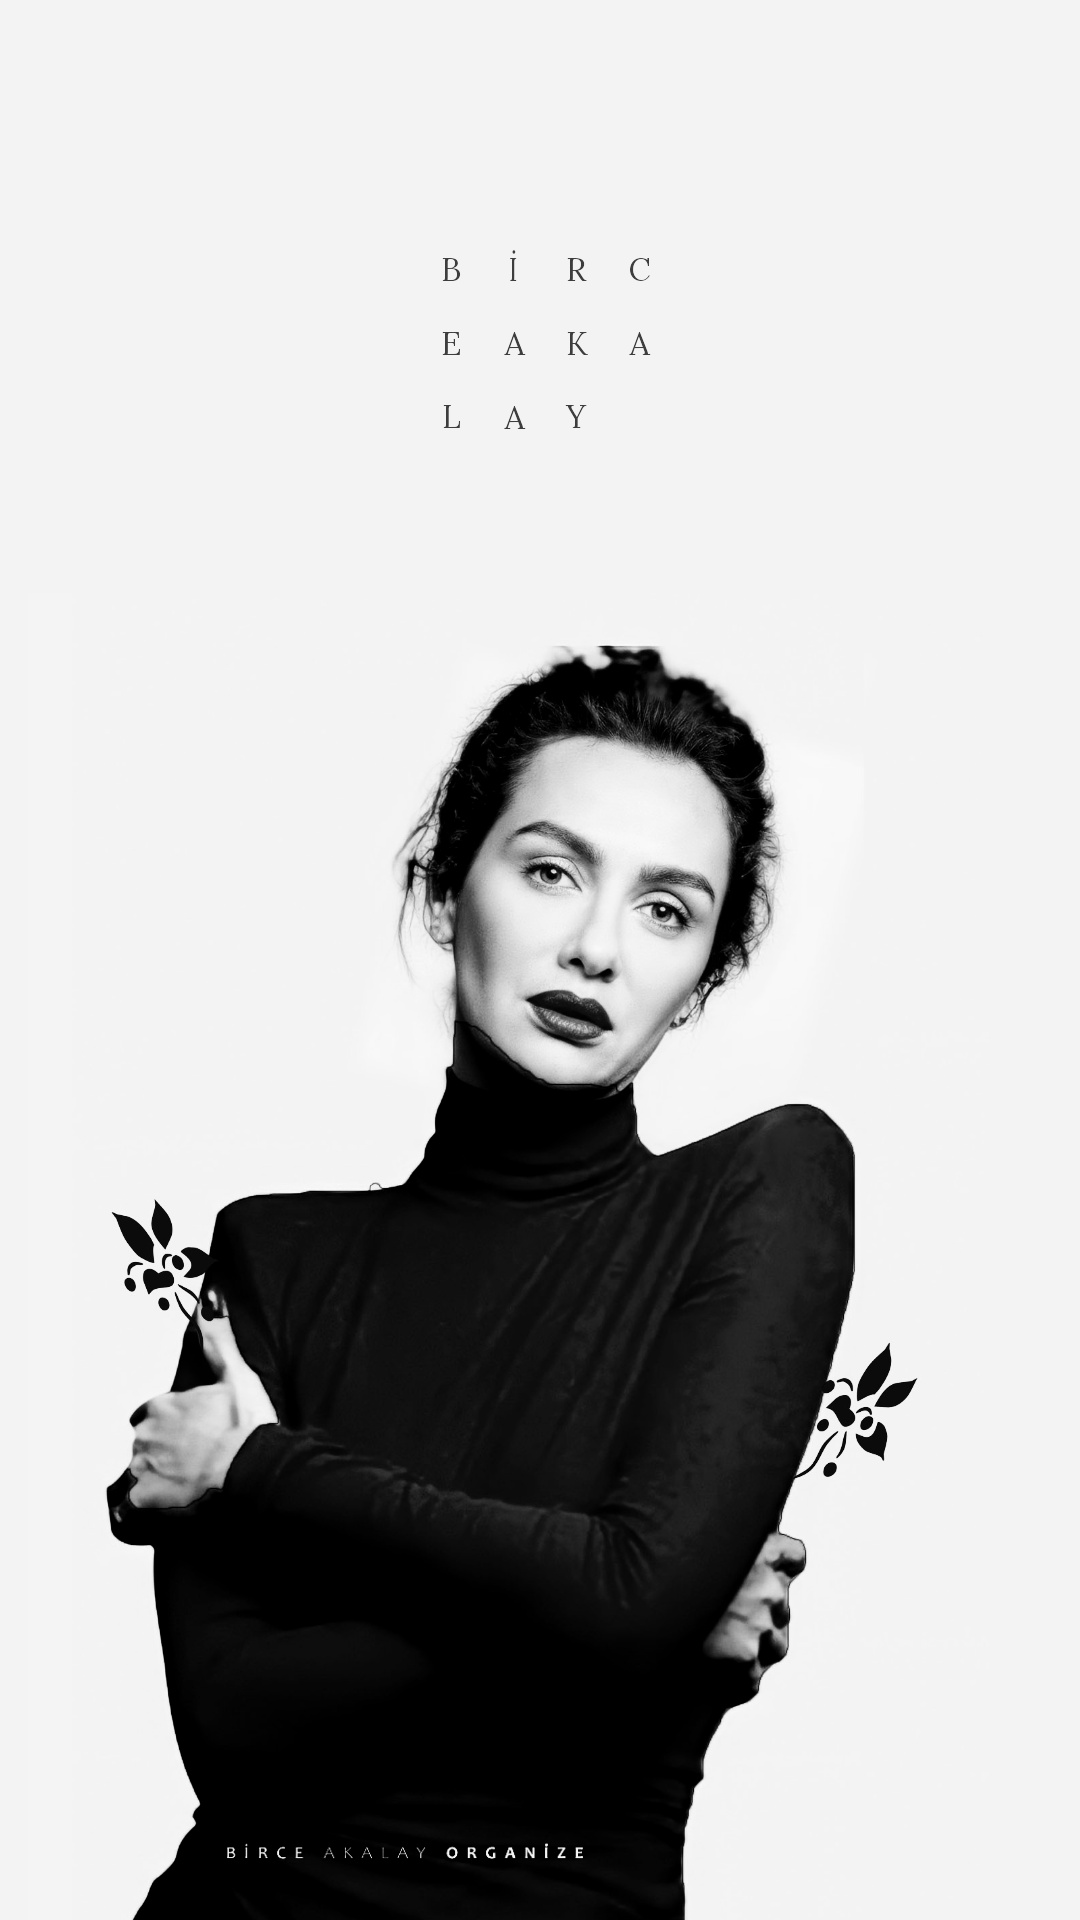 Birce Akalay: First leading role on television with the series Kader. 1080x1920 Full HD Background.